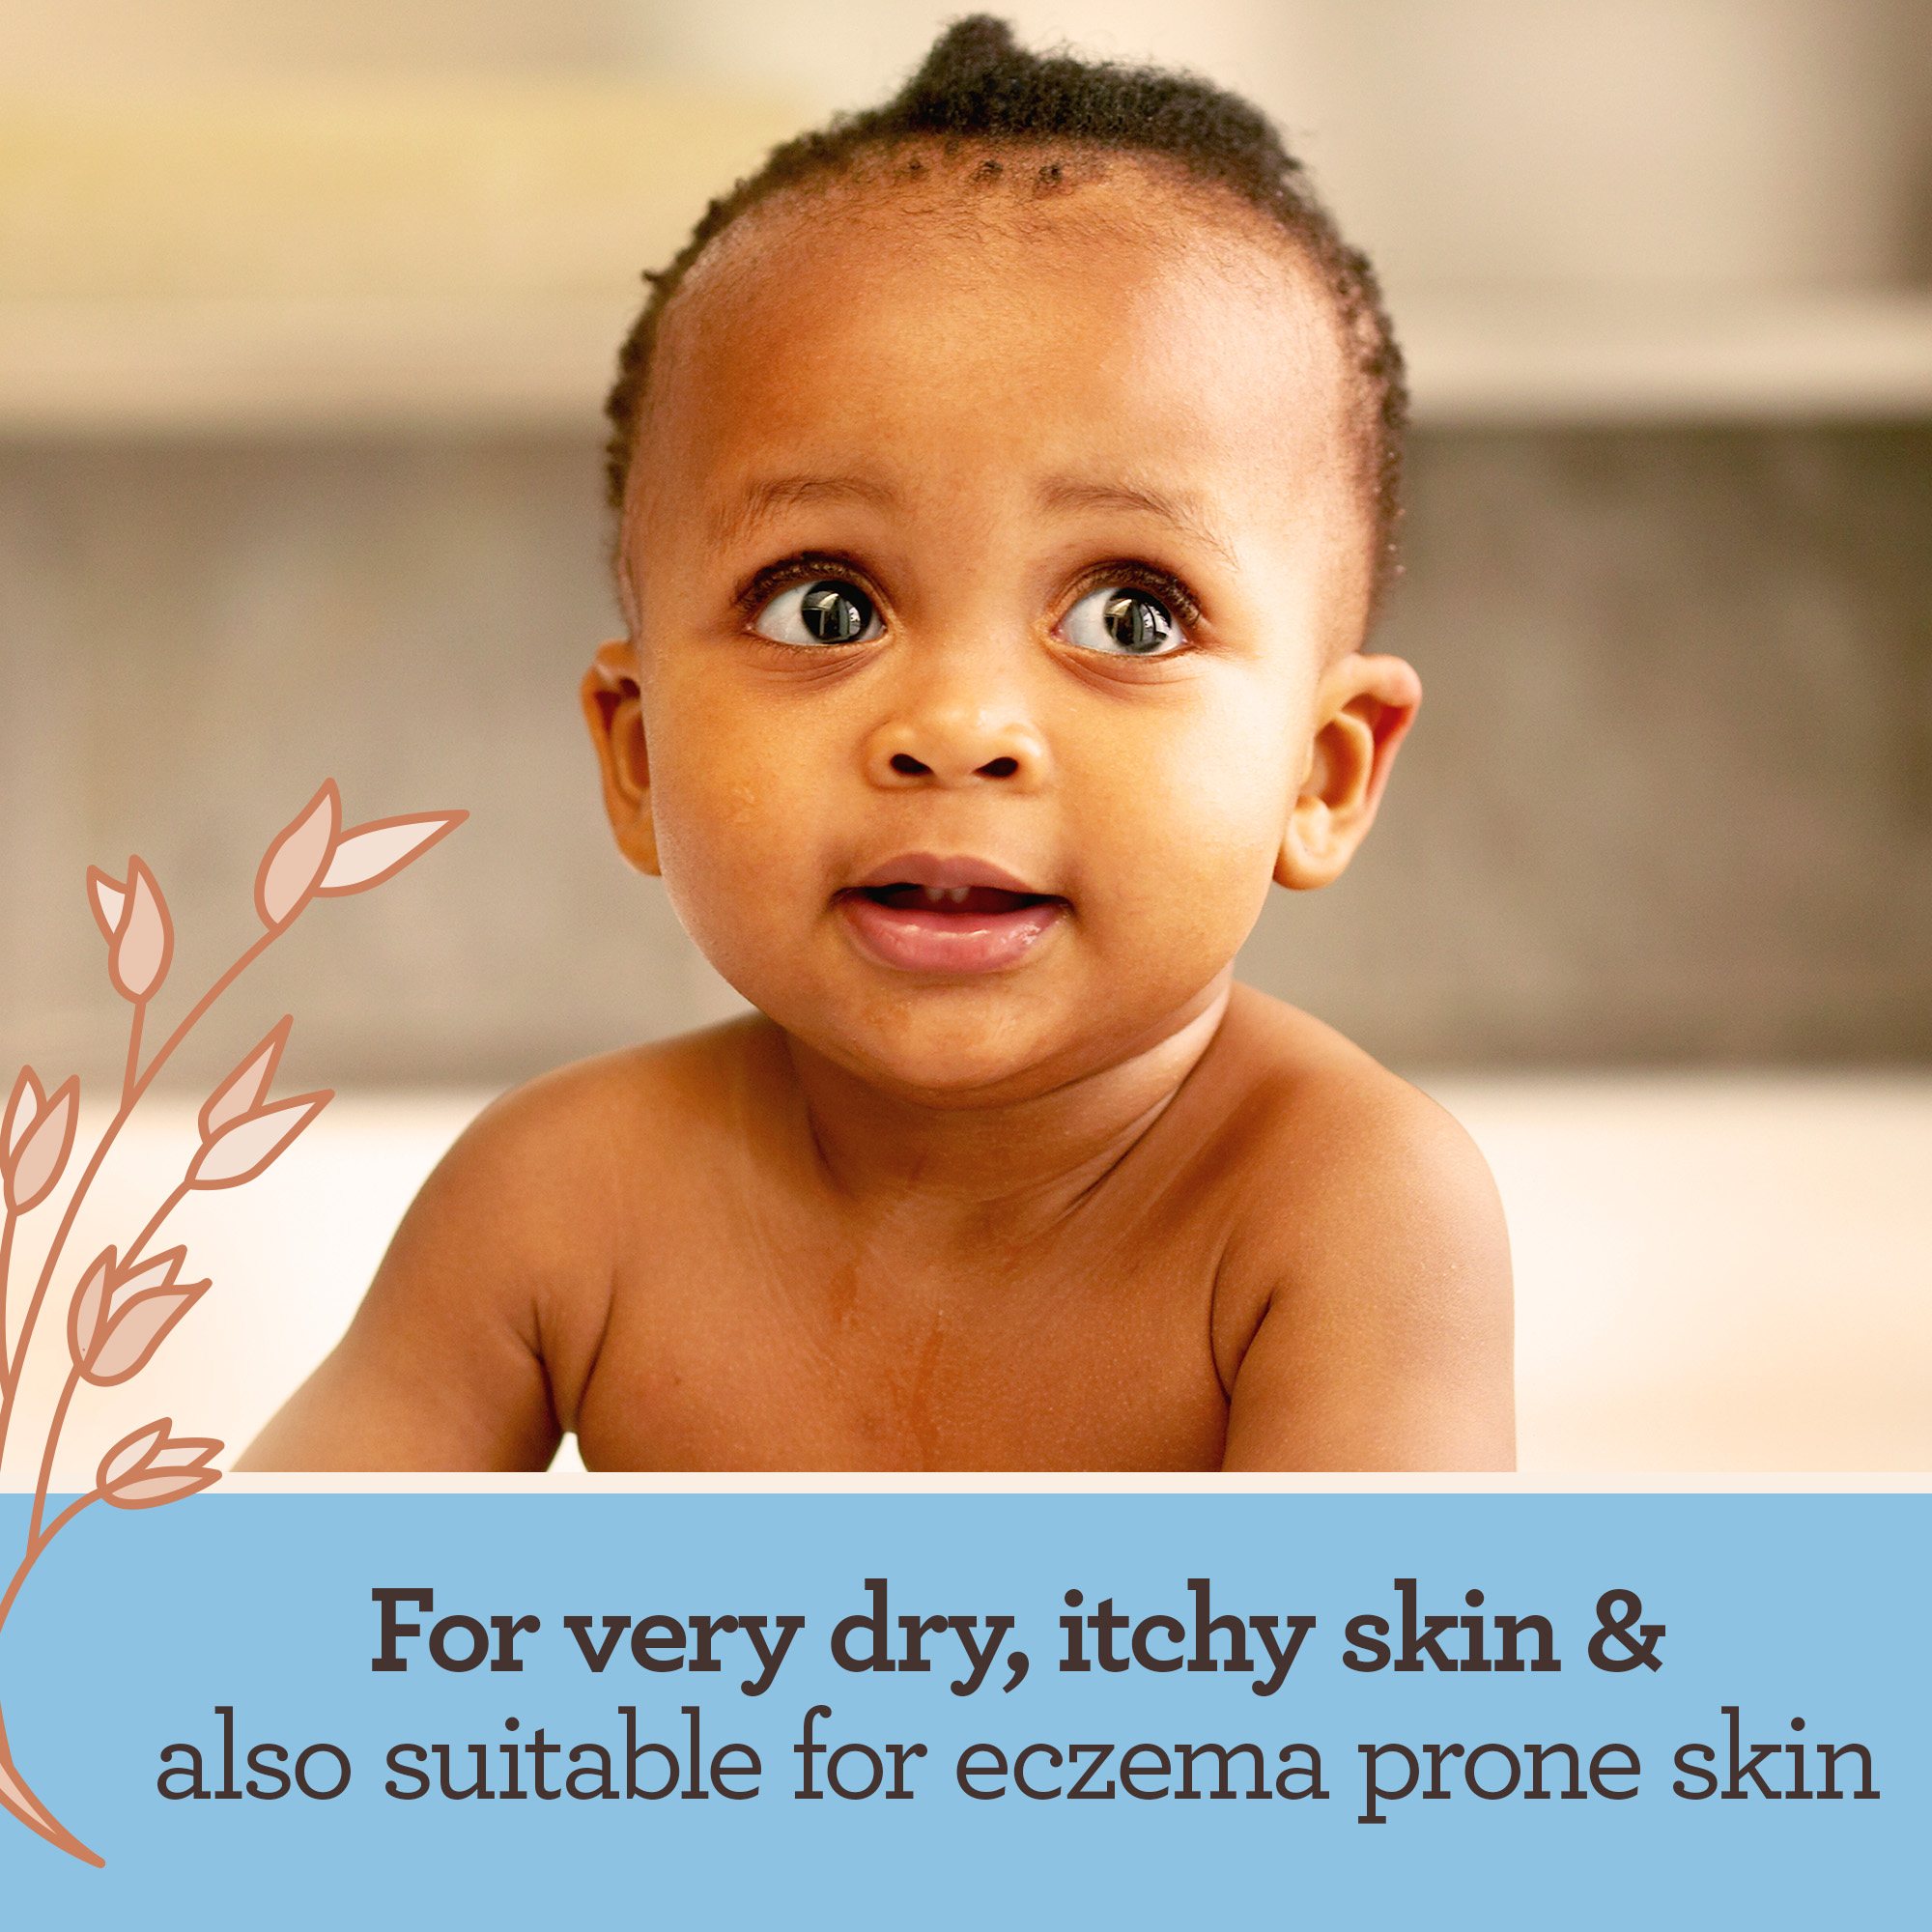 AVEENO® BABY DERMEXA GOOD NIGHT EMOLLIENT BALM FOR VERY DRY, ITCHY SKIN & ALSO SUITABLE FOR ECZEMA PRONE SKIN